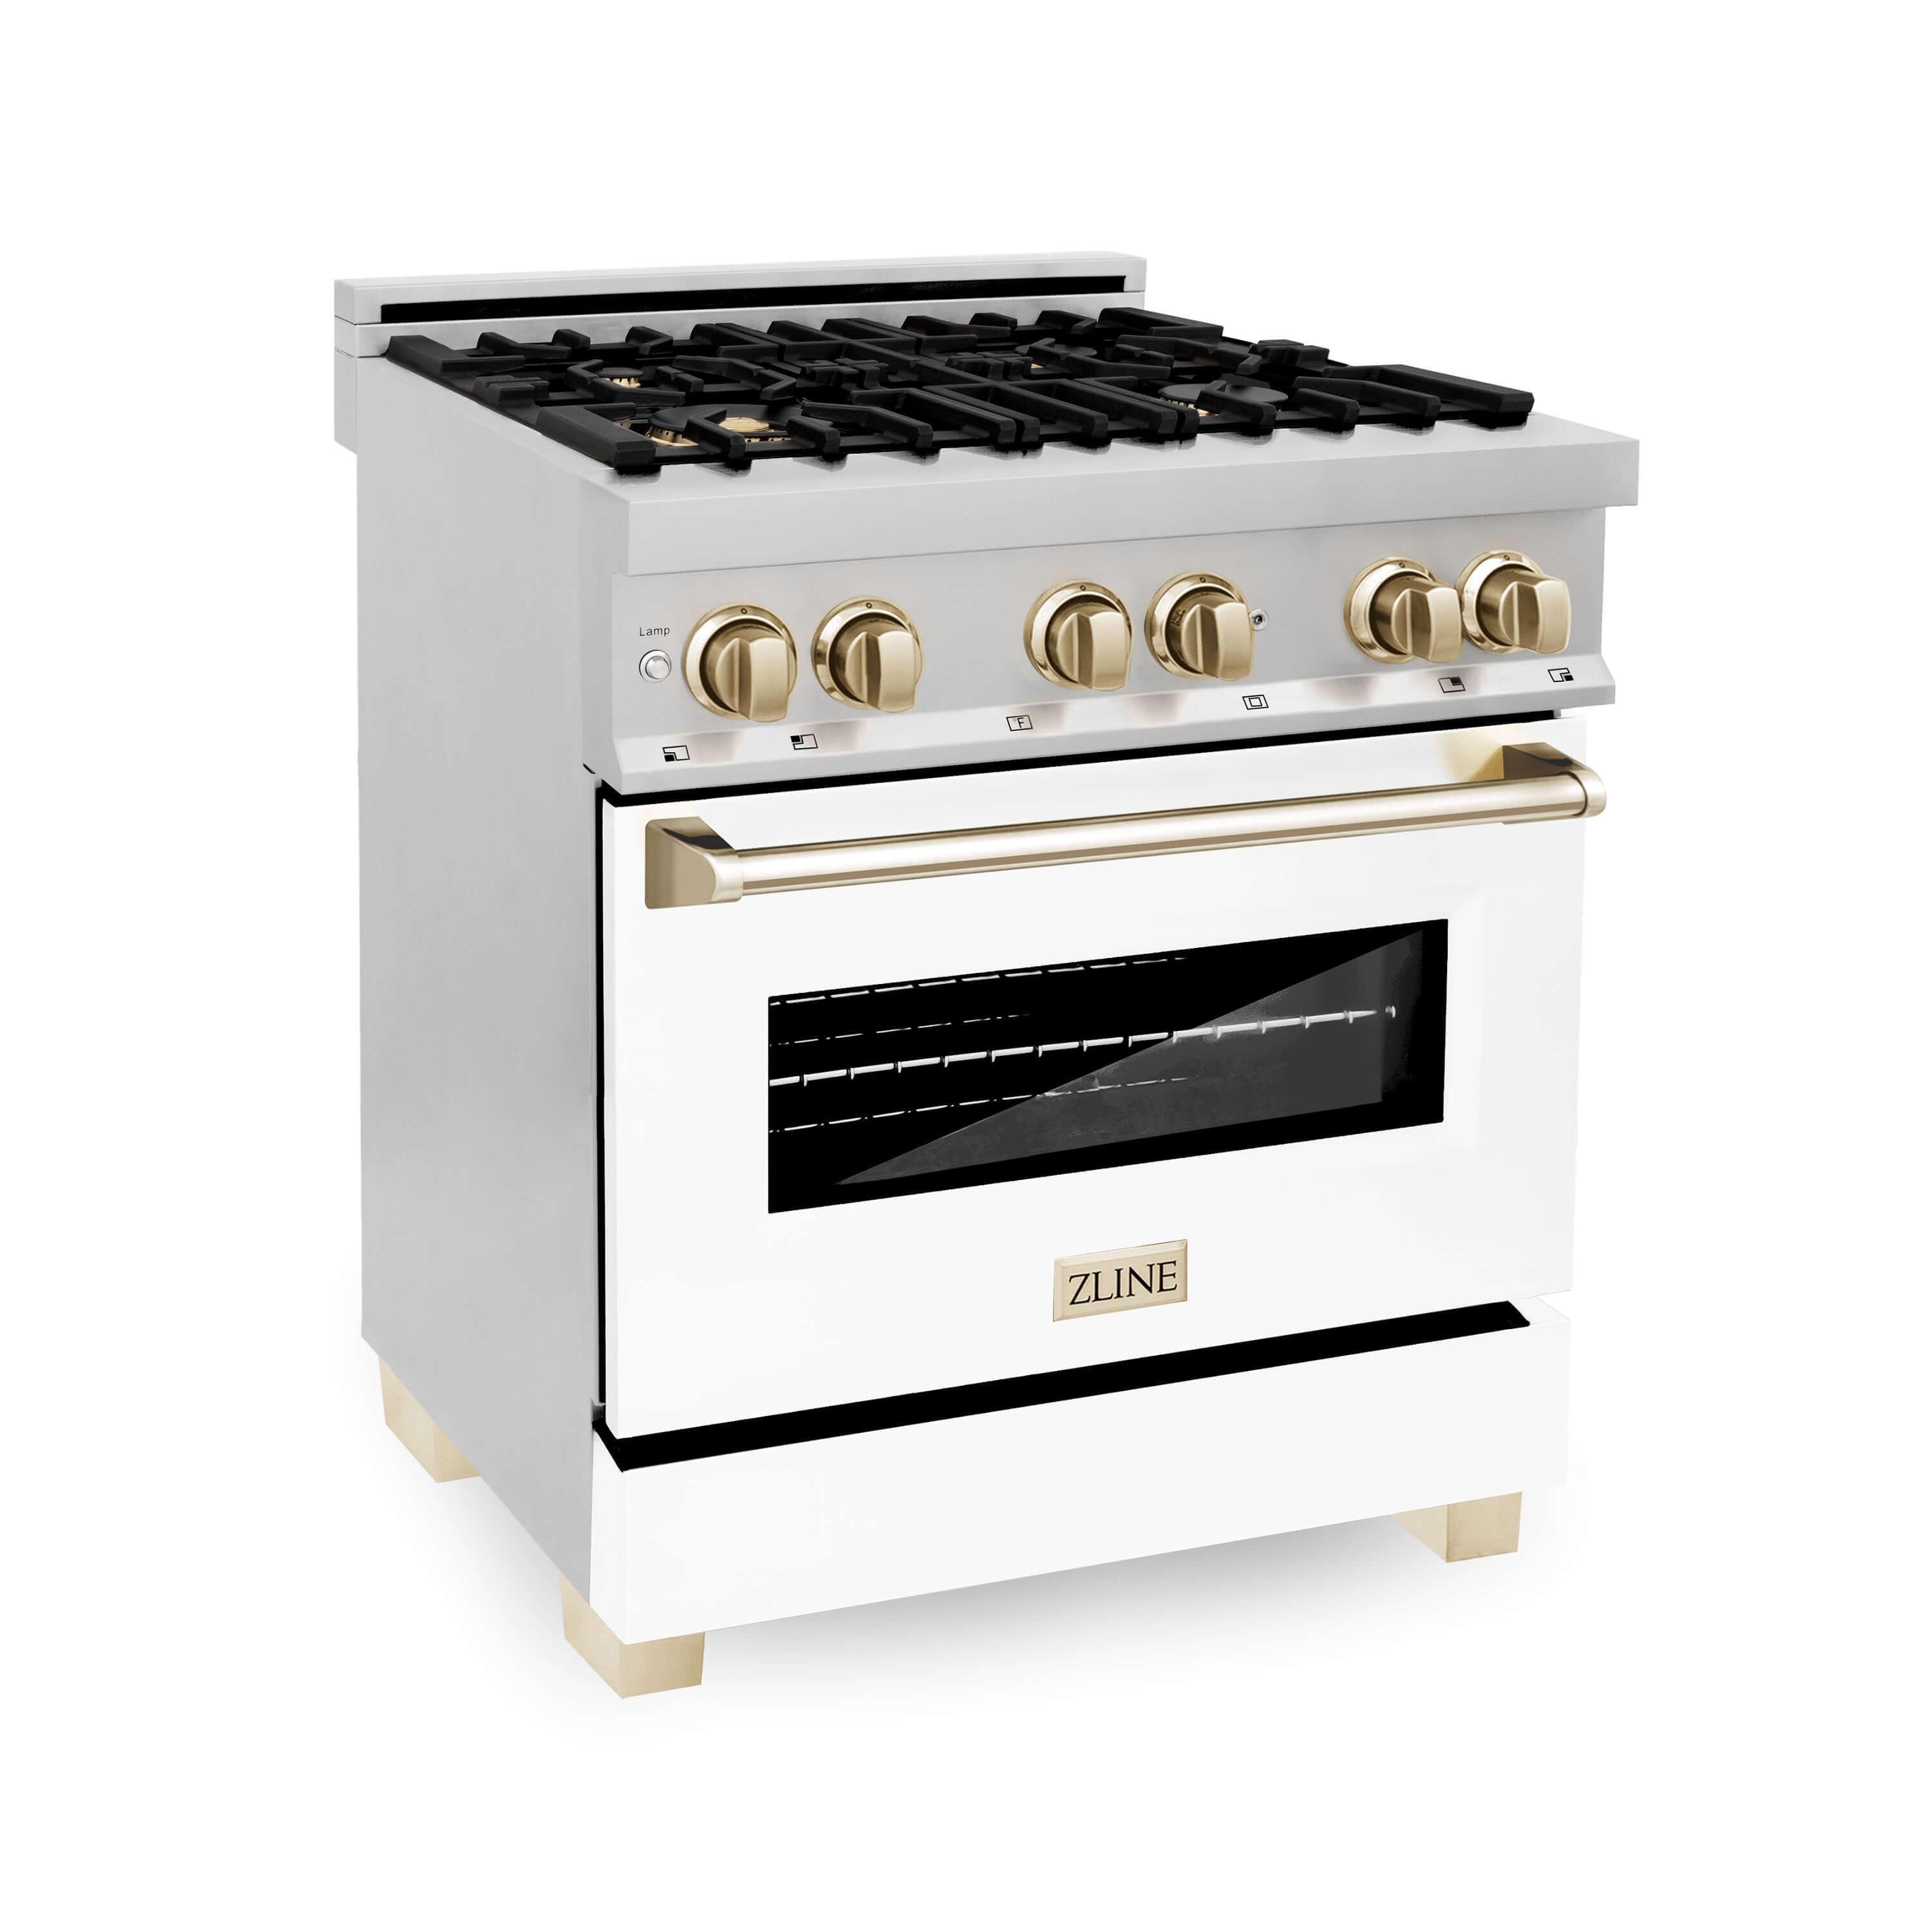 ZLINE Autograph Edition 30" Dual Fuel Range with White Matte Oven Door and Polished Gold Accents (RAZ-WM-30-G)